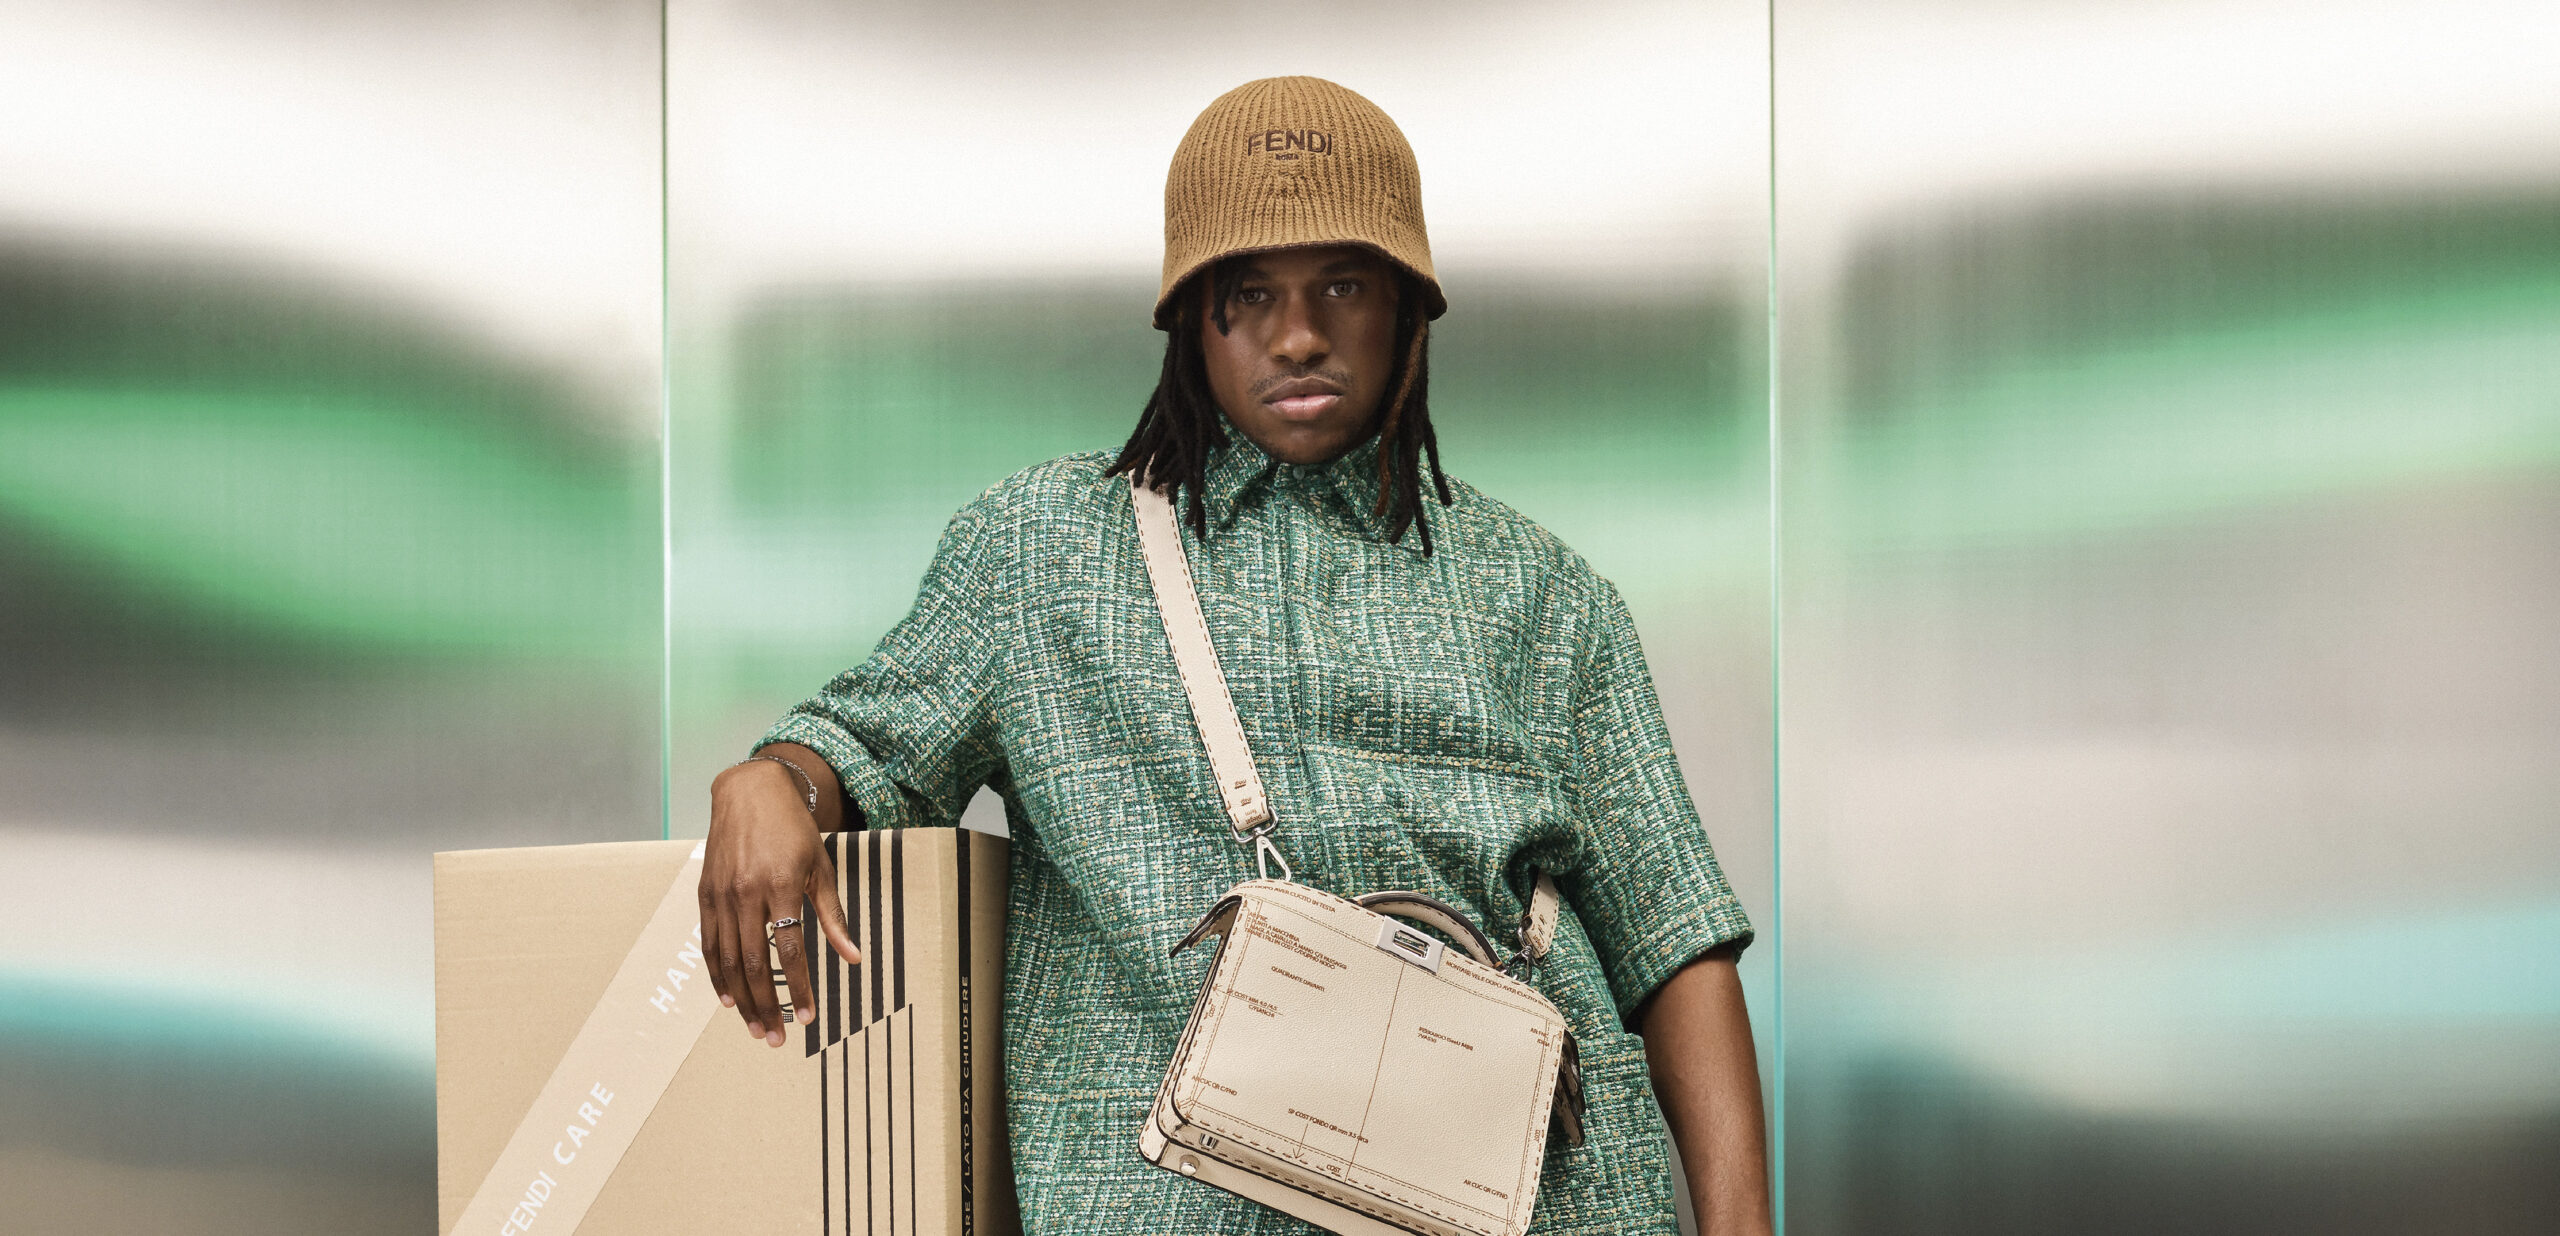 Jeremy Pope poses for Fendi Men's SS24, leaning on cardboard boxes, dressed in a patterned green jacket, khaki shorts, accessorized with a bucket hat, and carrying a white Fendi bag.